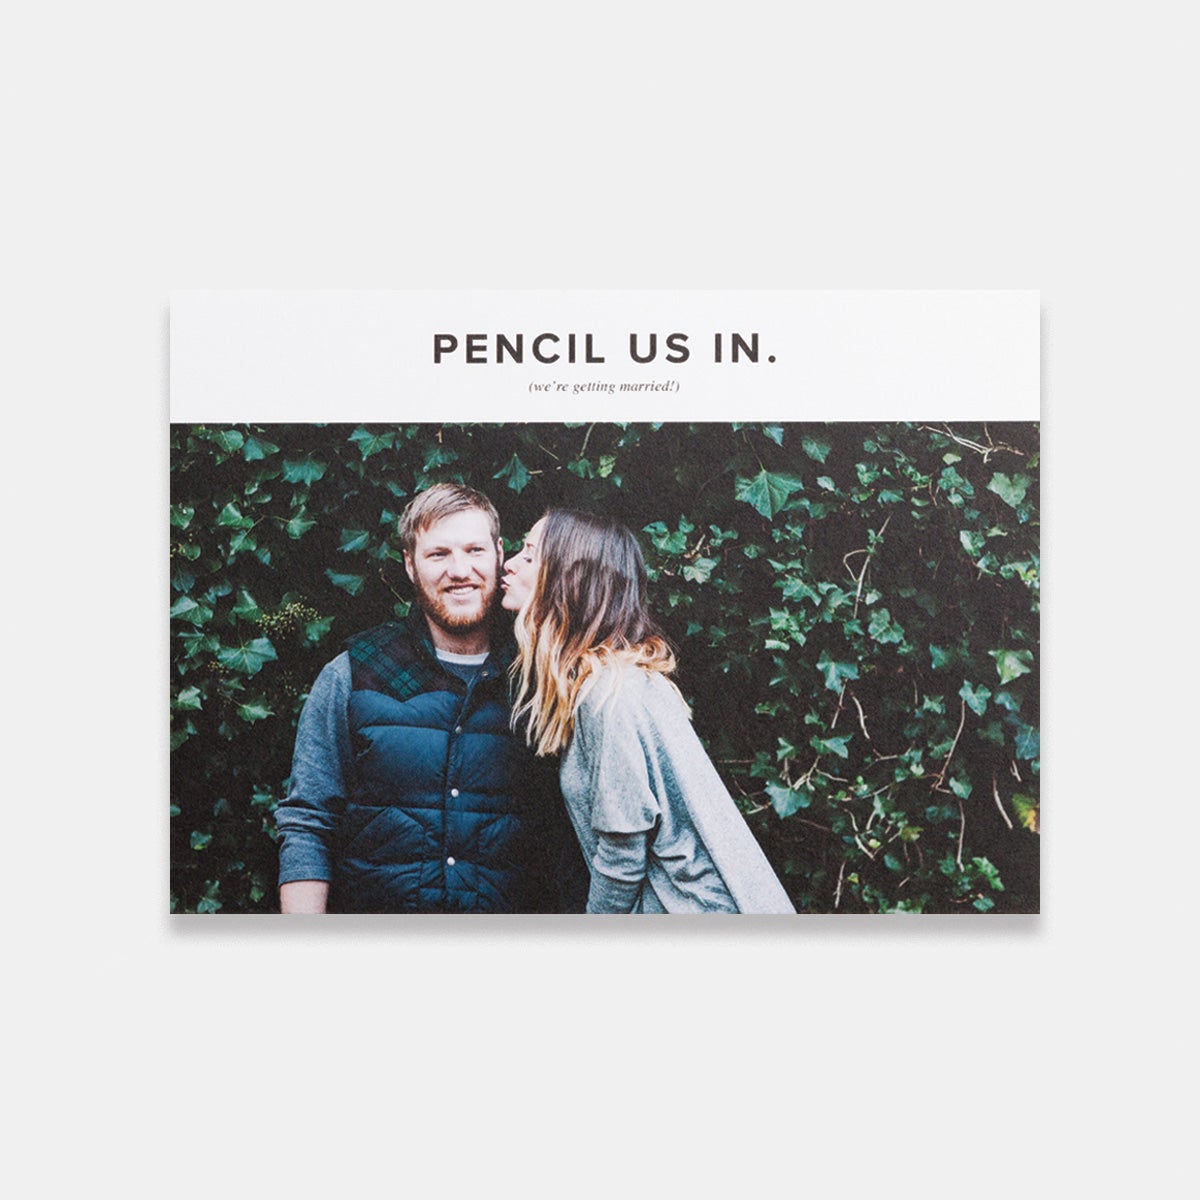 Pencil Us In Save The Date